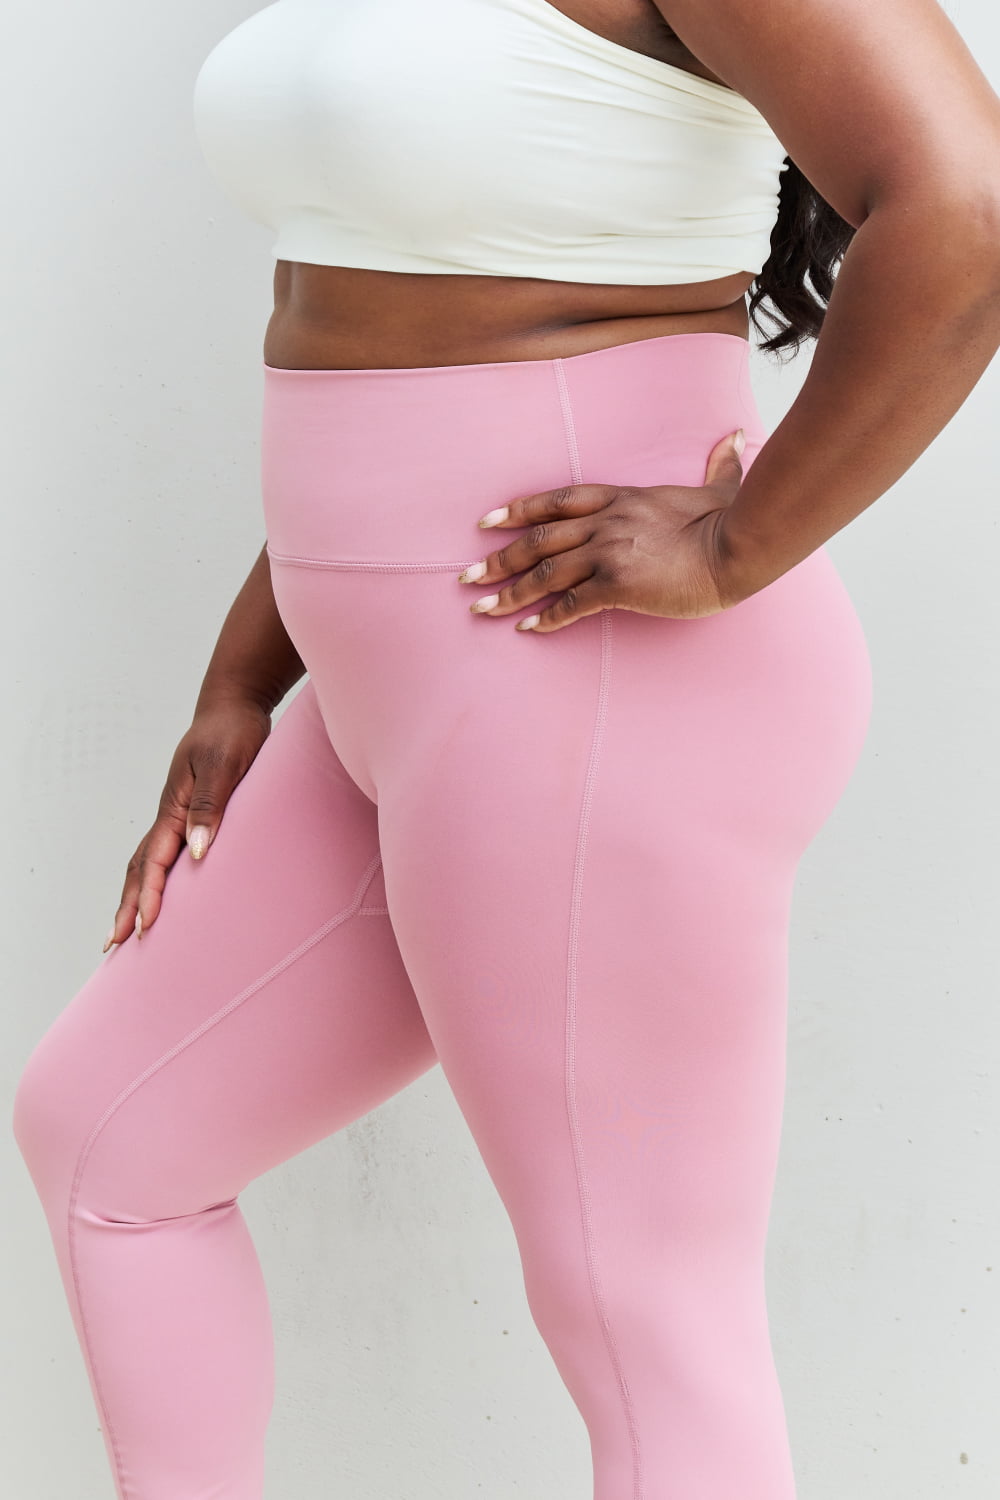 Zenana Fit For You Full Size High Waist Active Leggings in Light Rose –  County Line Casuals